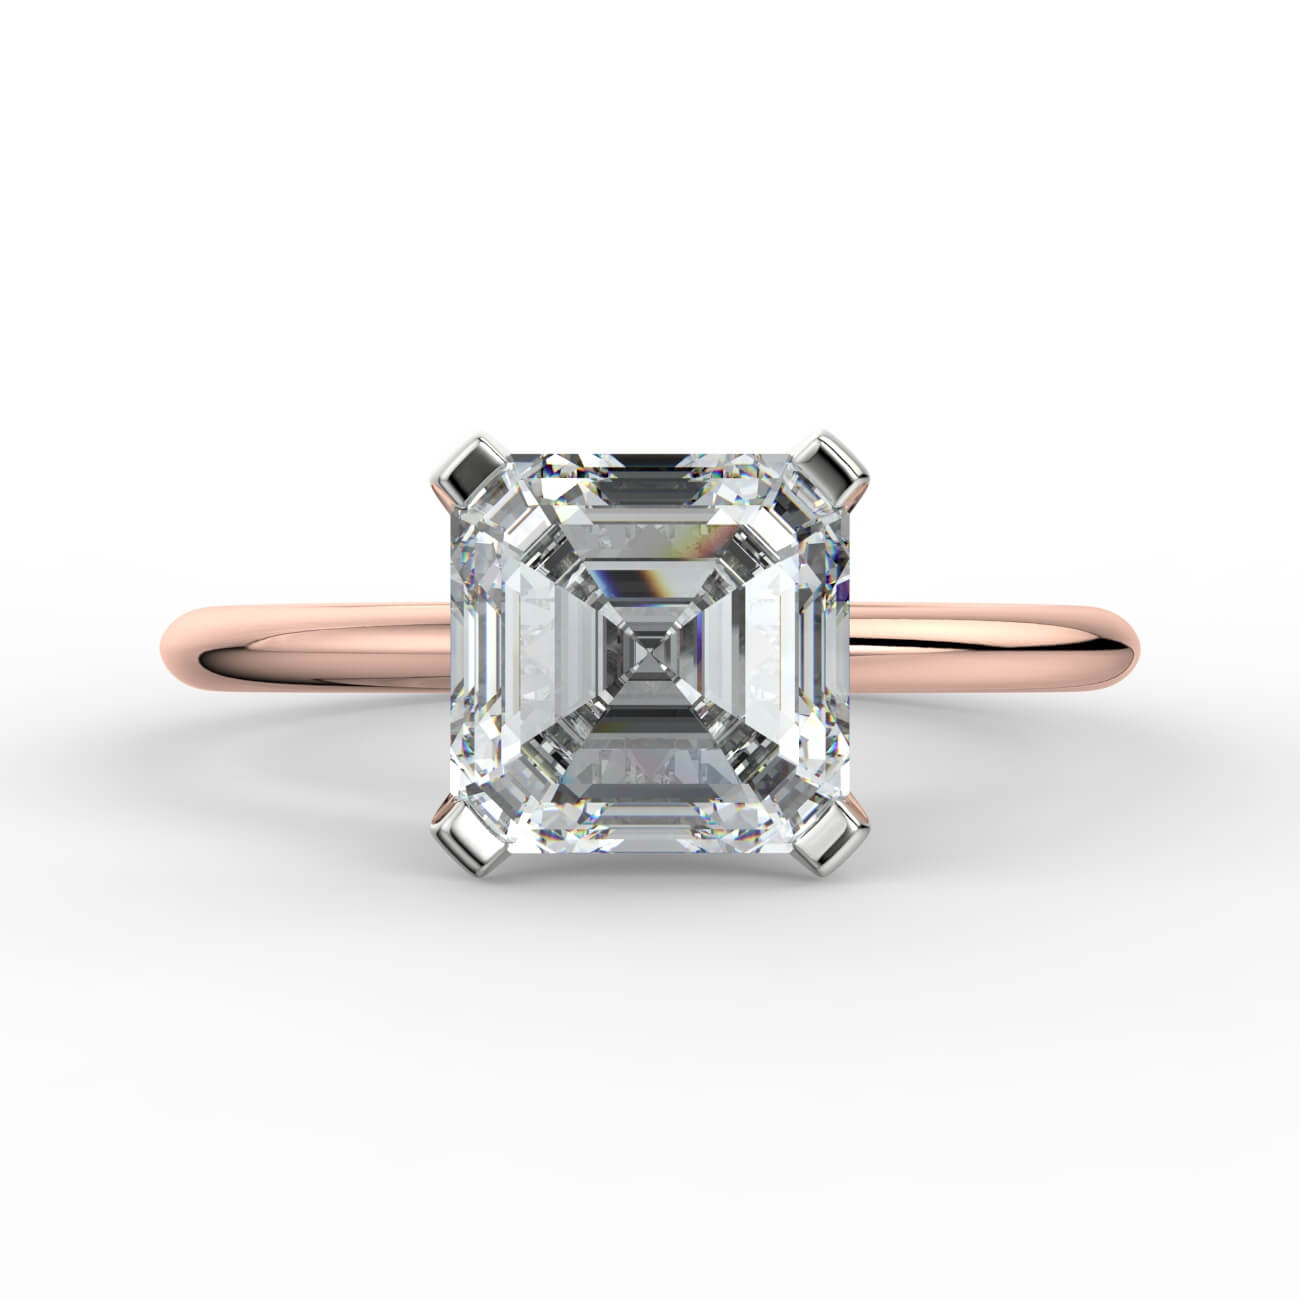 Knife-edge solitaire asscher cut diamond engagement ring in white and rose gold – Australian Diamond Network